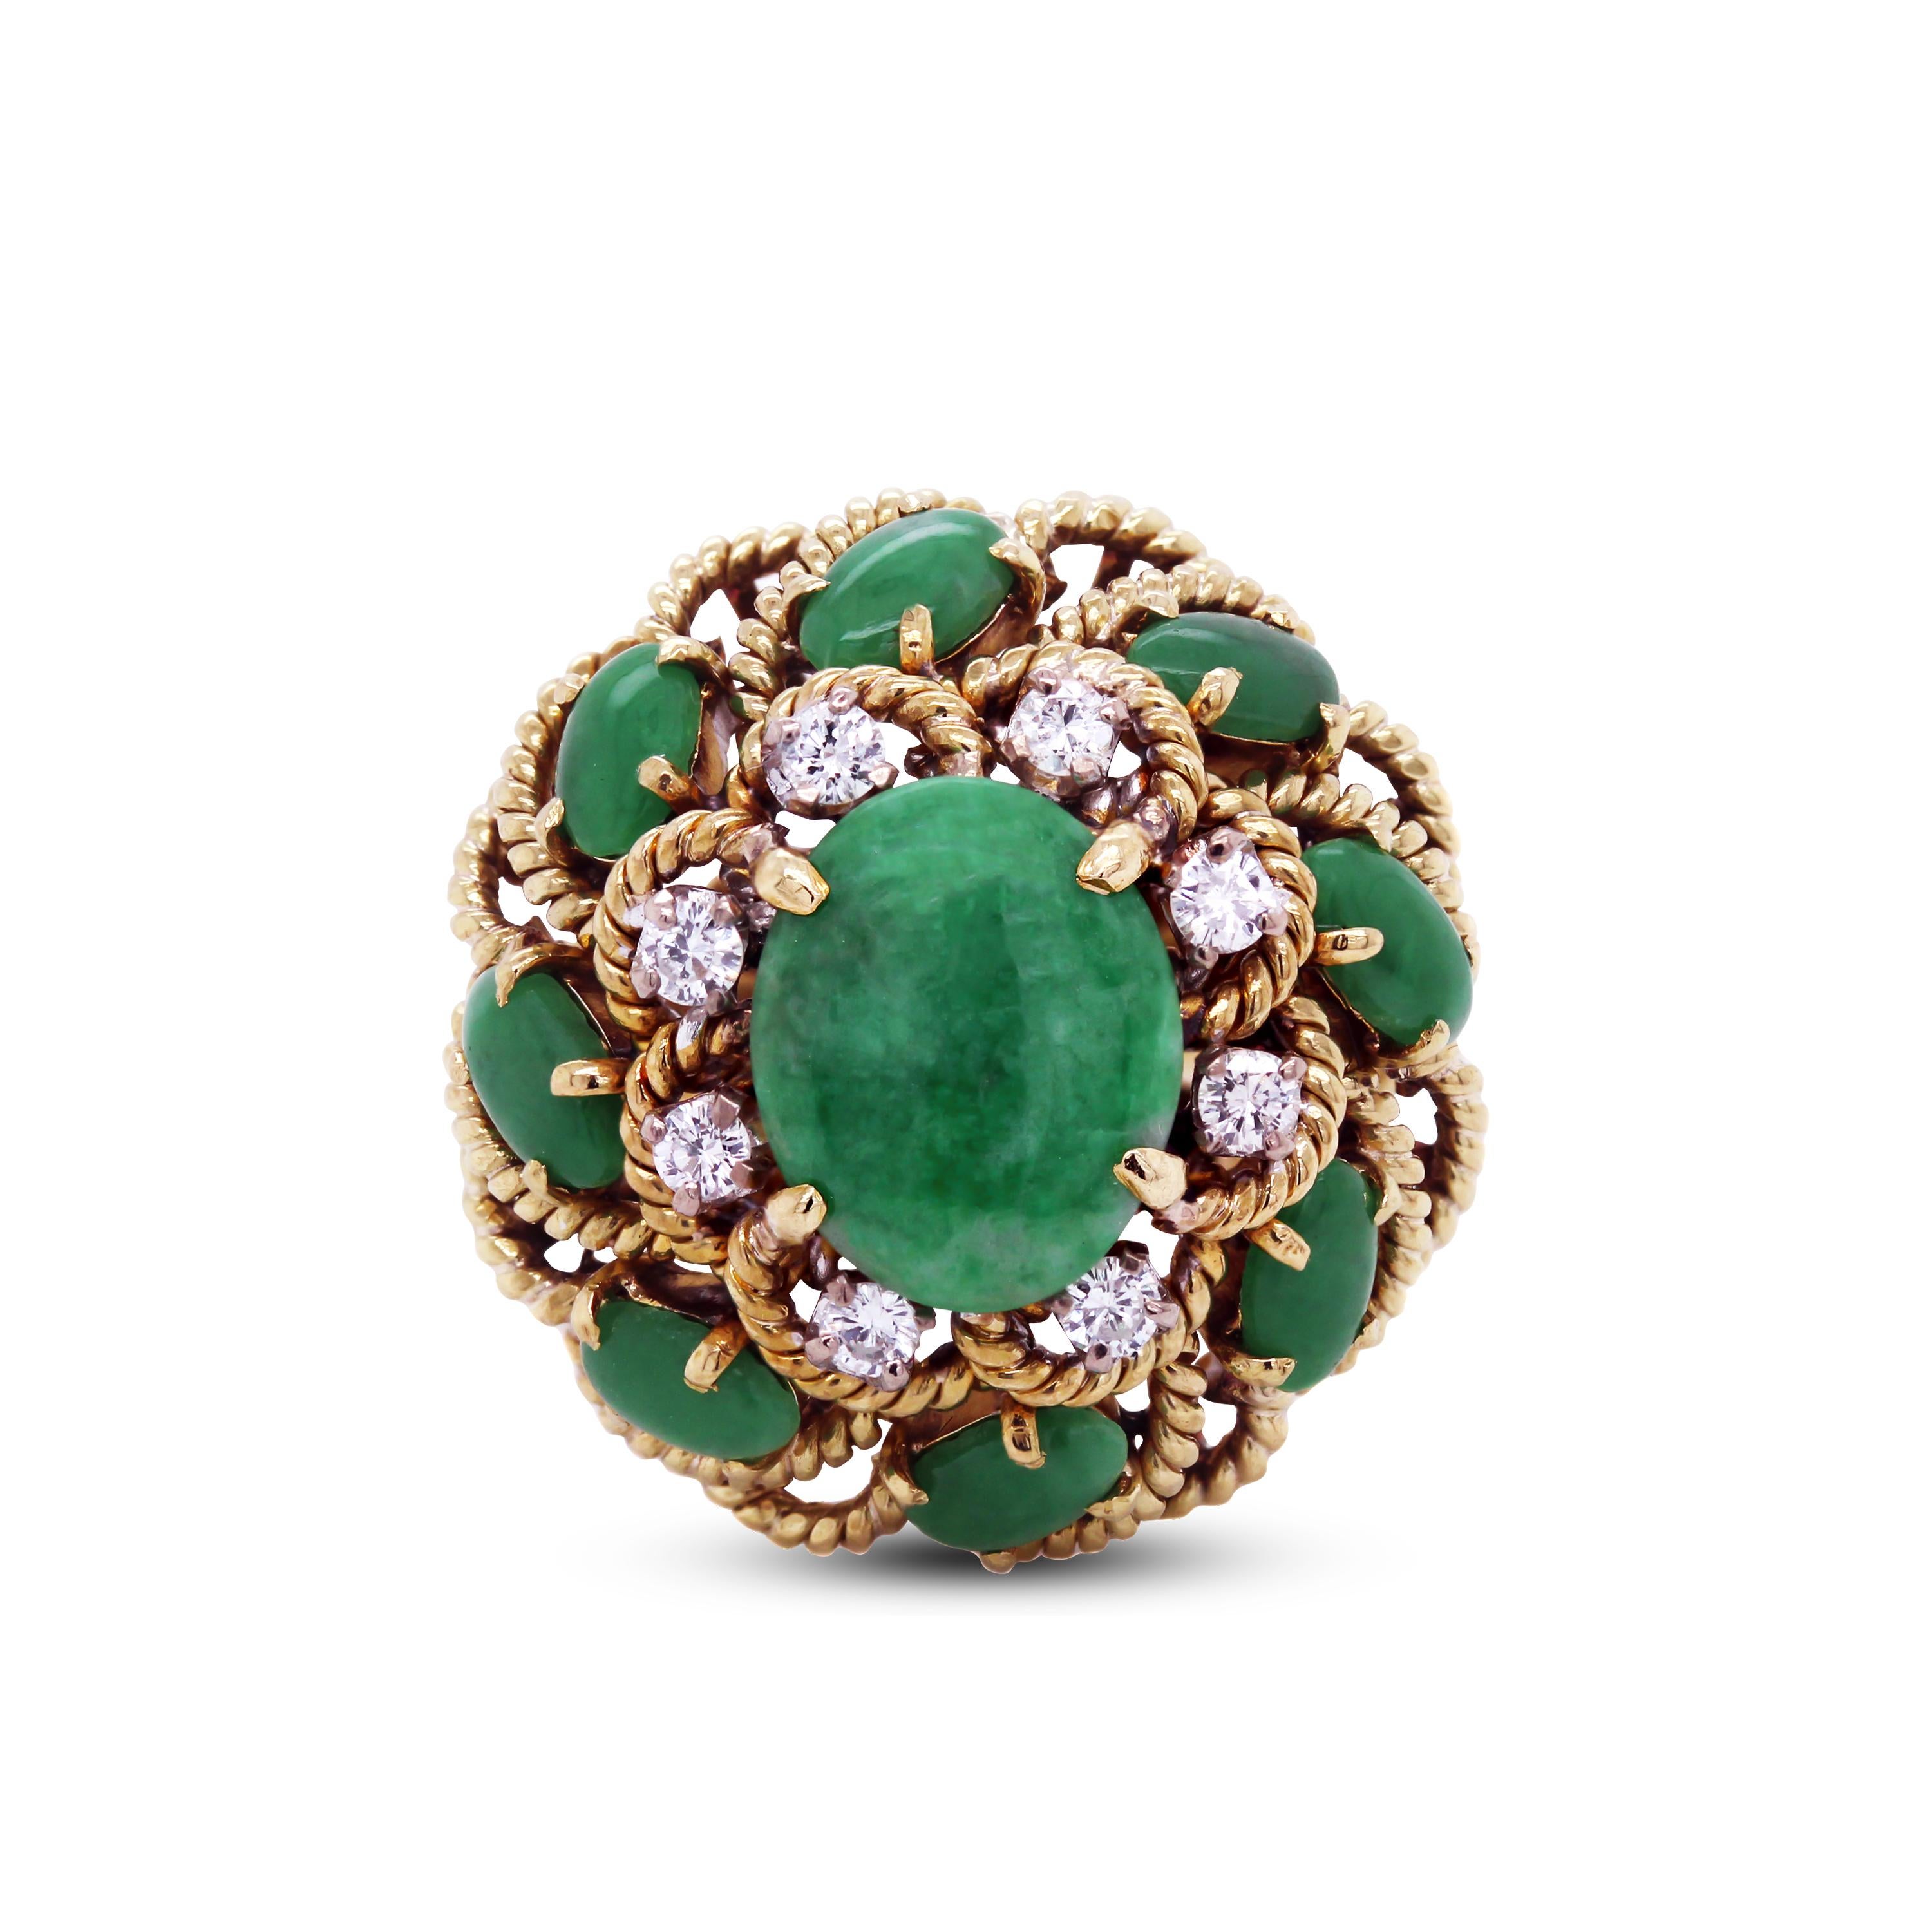 18K Yellow Gold Cocktail Ring with Jade and Diamonds

This estate piece features eight Jades on the edges surrounded by hand-twisted gold wire design work.

All jades are oval-cut.

0.24 carat G color, VS clarity diamonds total weight

Size 6.5.